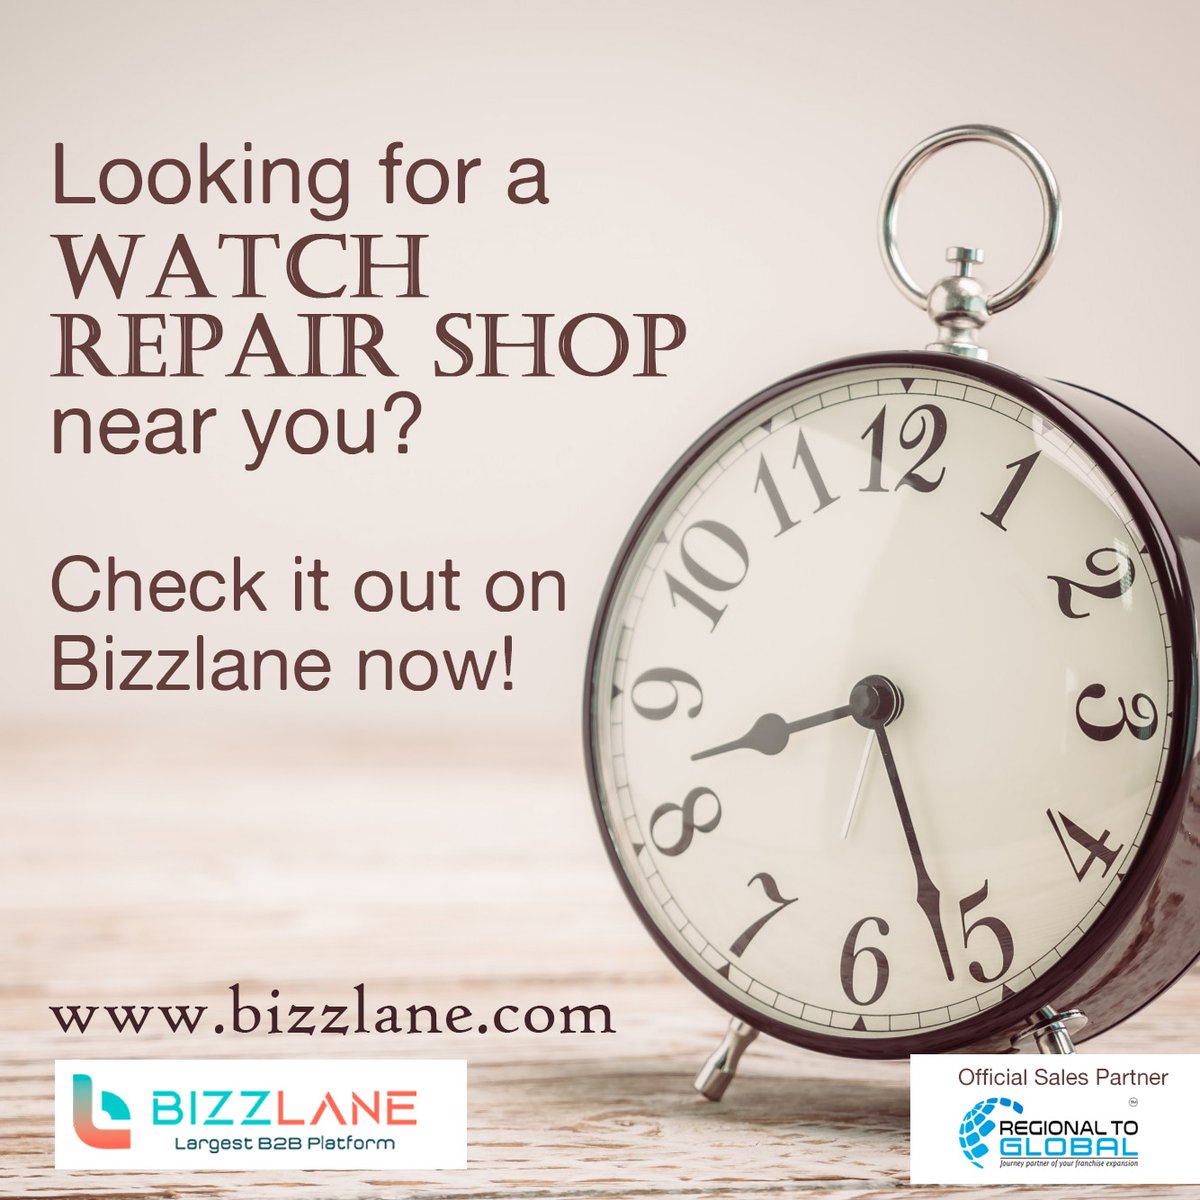 Bizzlane in Ahmedabad watch repairing near me consistently tops the list of best watch brands in the world and is a status symbol like no other.ServicesEverything ElseAll Indiaother